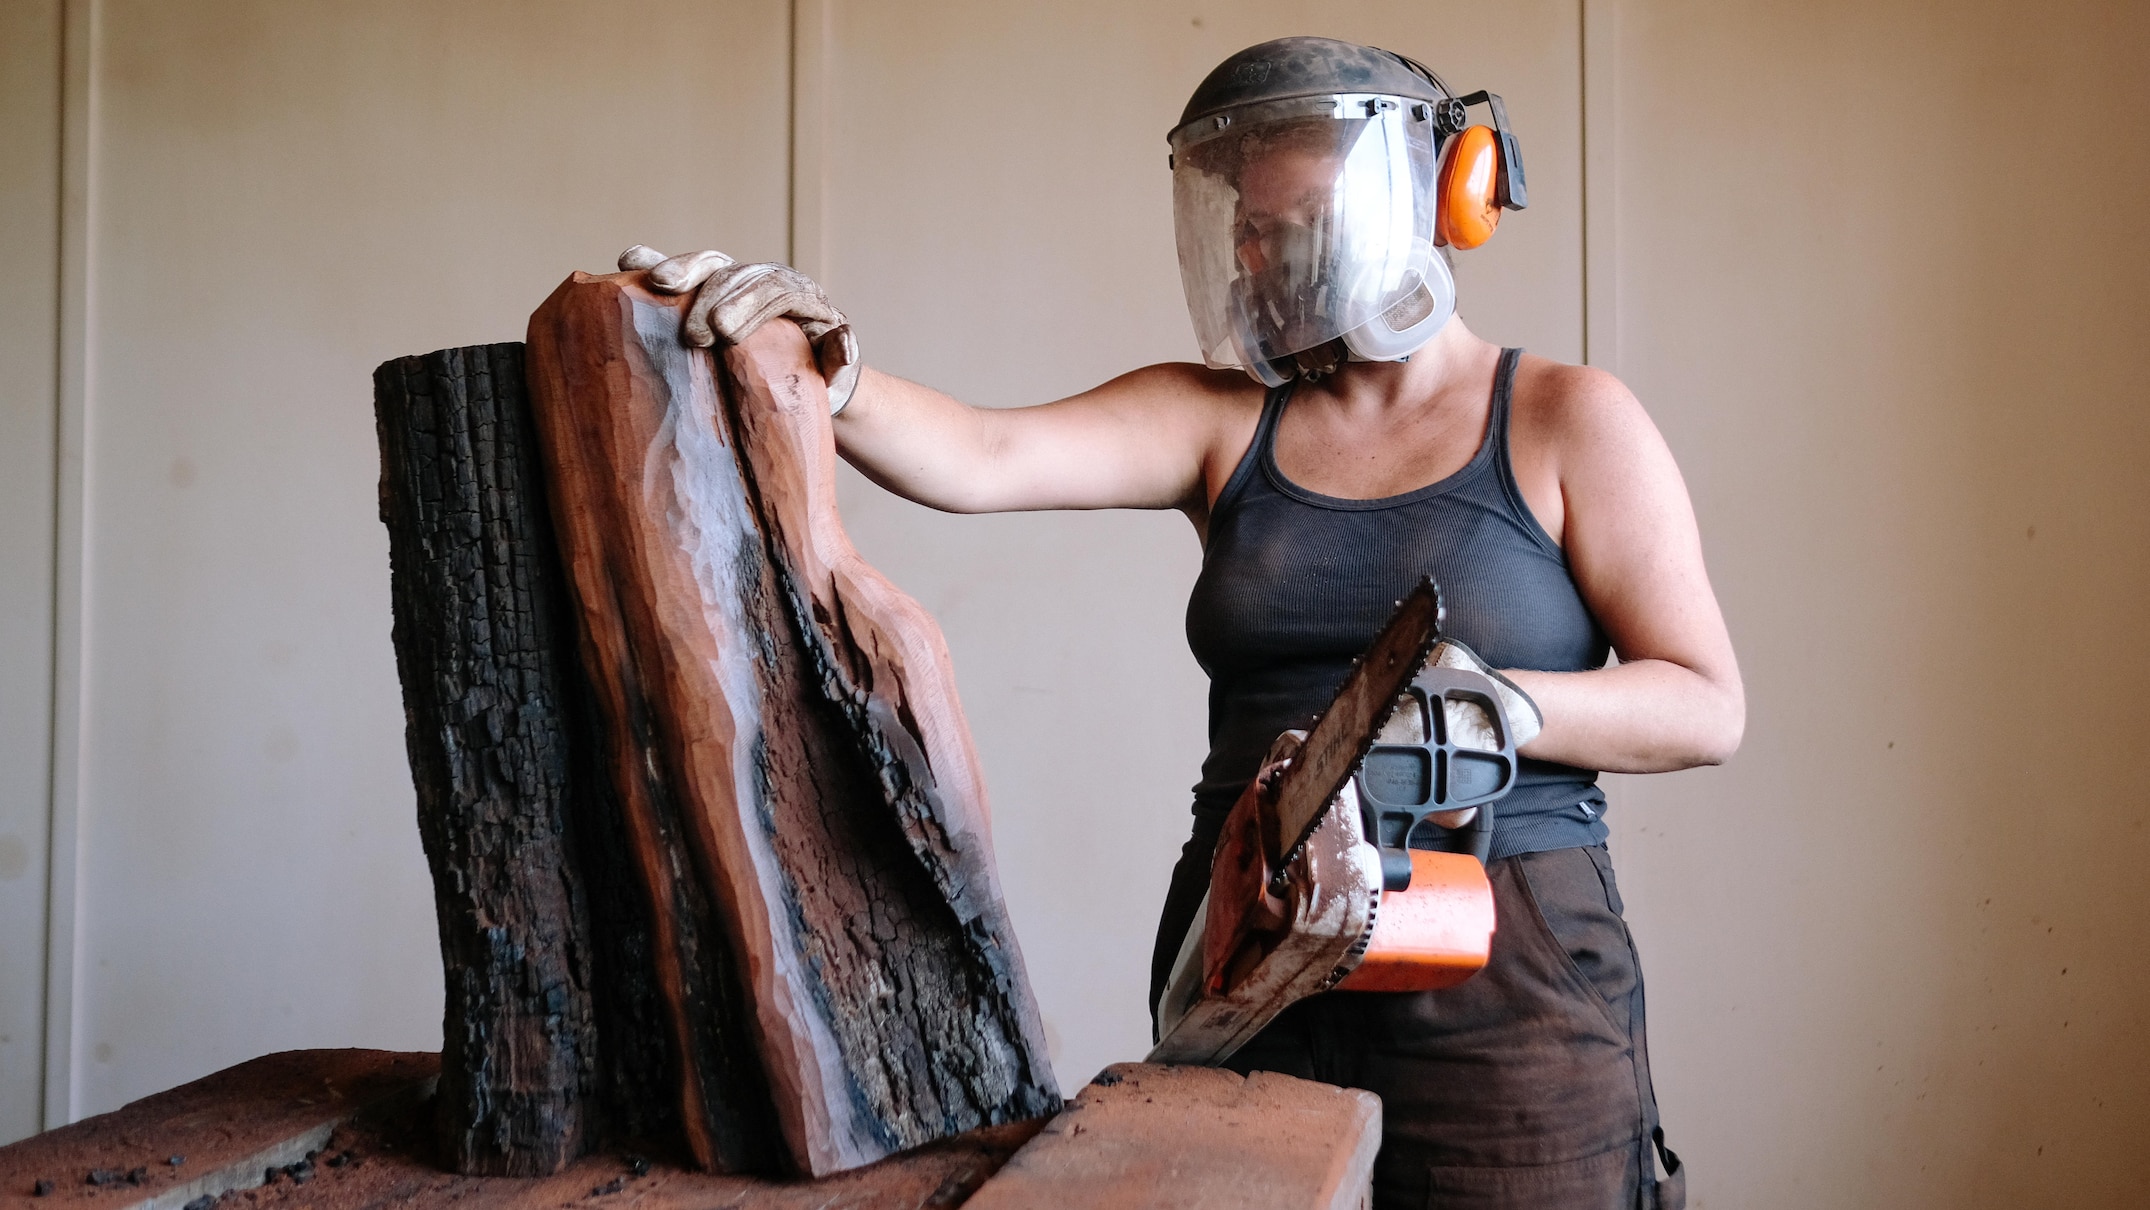 west australian woodworker artist olive gill-hille goes against the grain to create remarkable, feminine forms